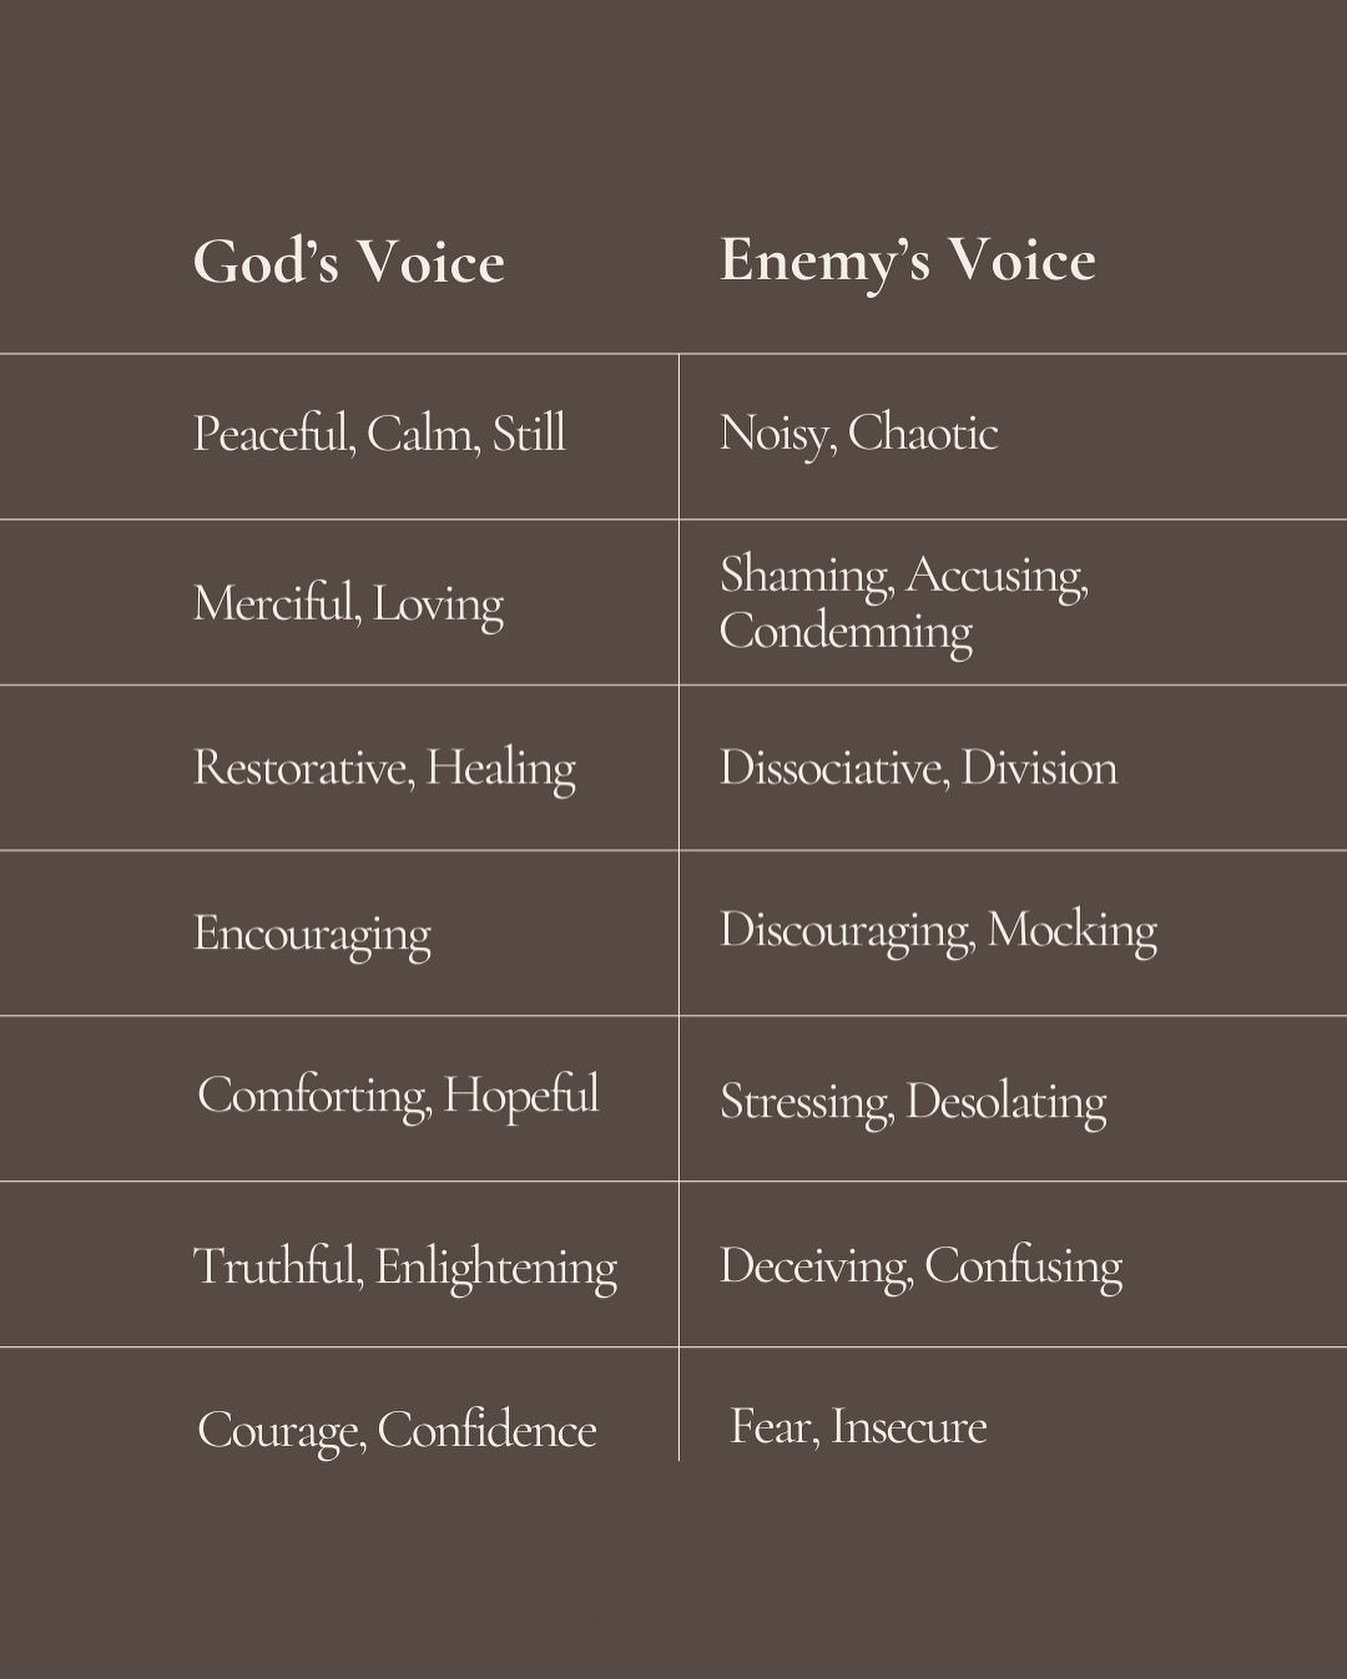 How do you know which voice you are hearing?

#catholicliving #catholiclifecoaching #catholiccoaching #catholiccoach #meekandhumble #saintinprogress #catholiclife #catholiclifestyle #simplecatholic #catholicabundance #catholiclifecoach #catholicsimpl